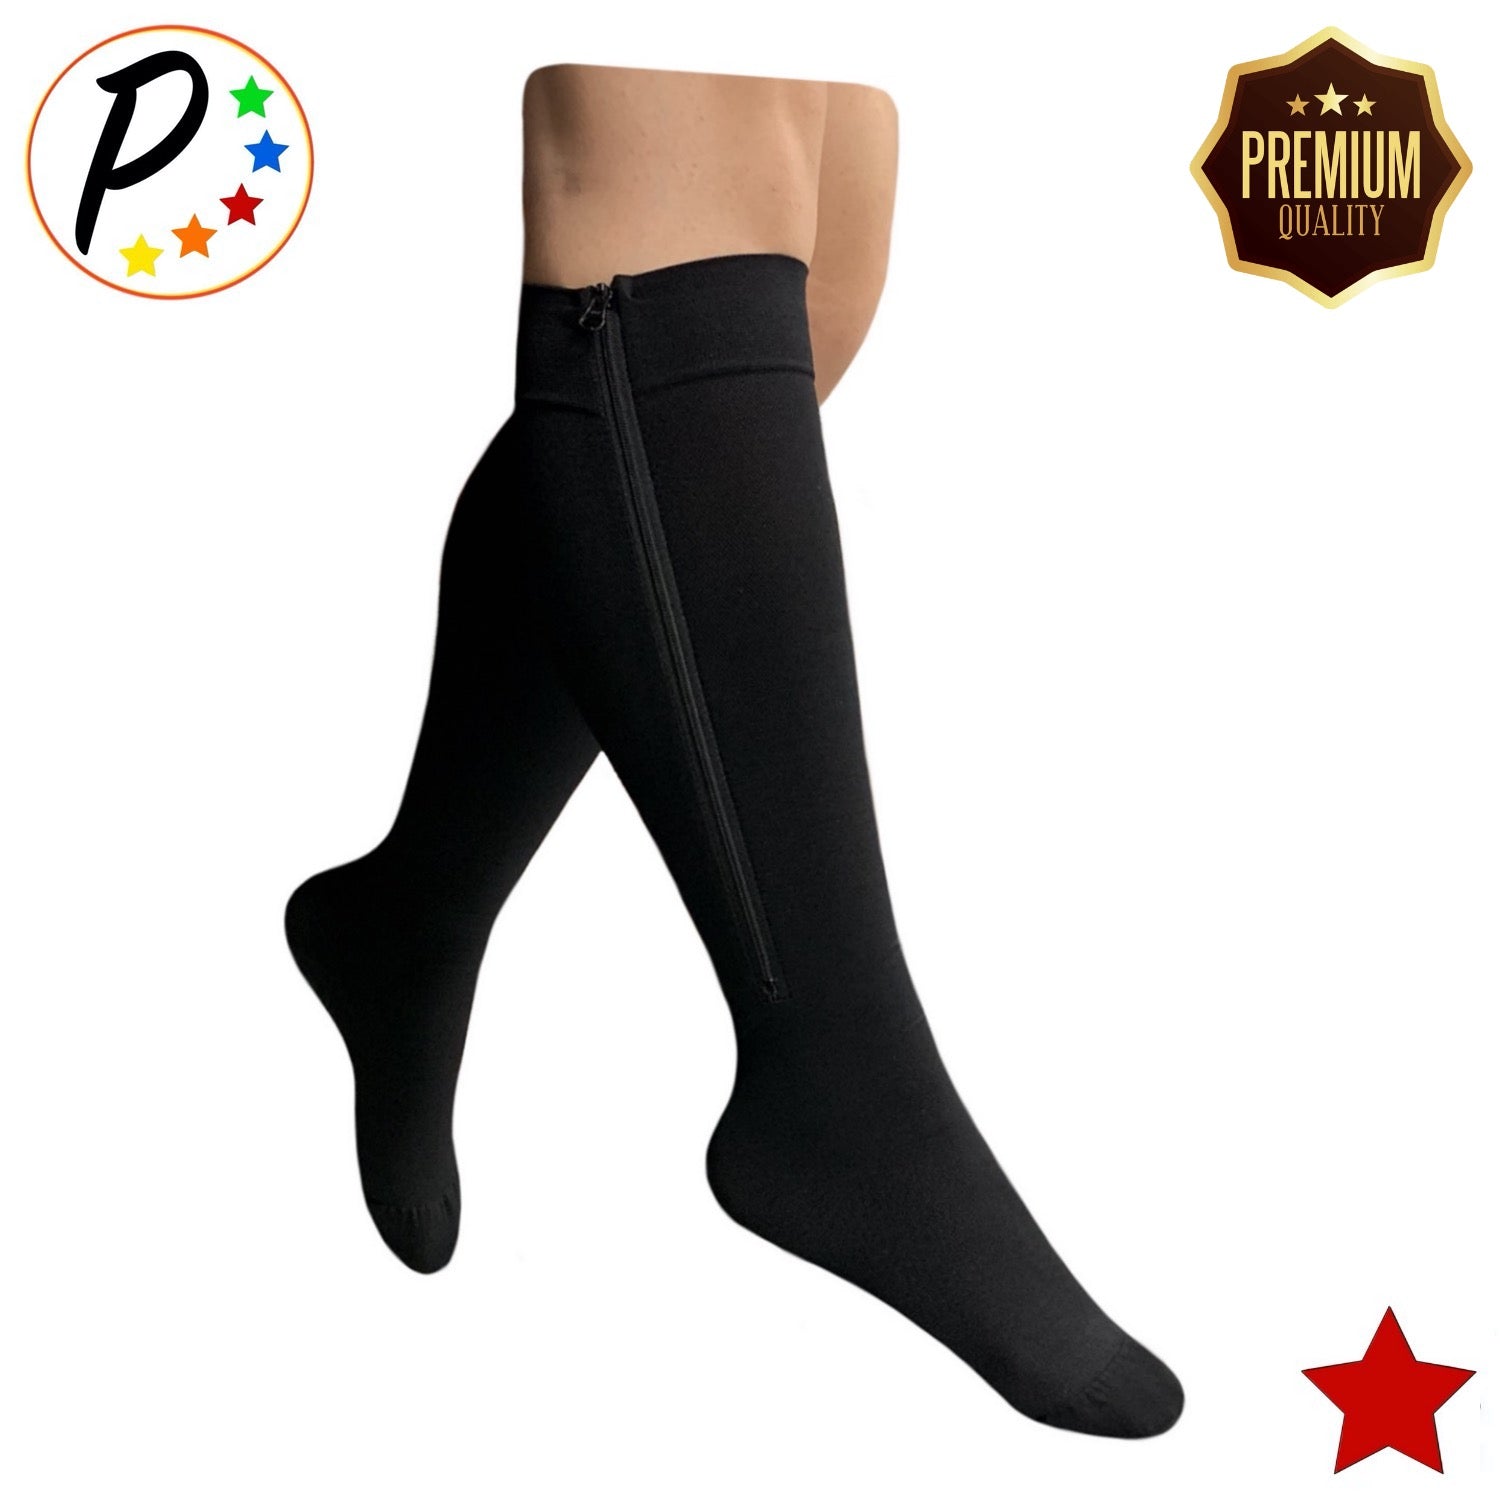 Open Toe Knee High Medical Compression Socks with Zipper